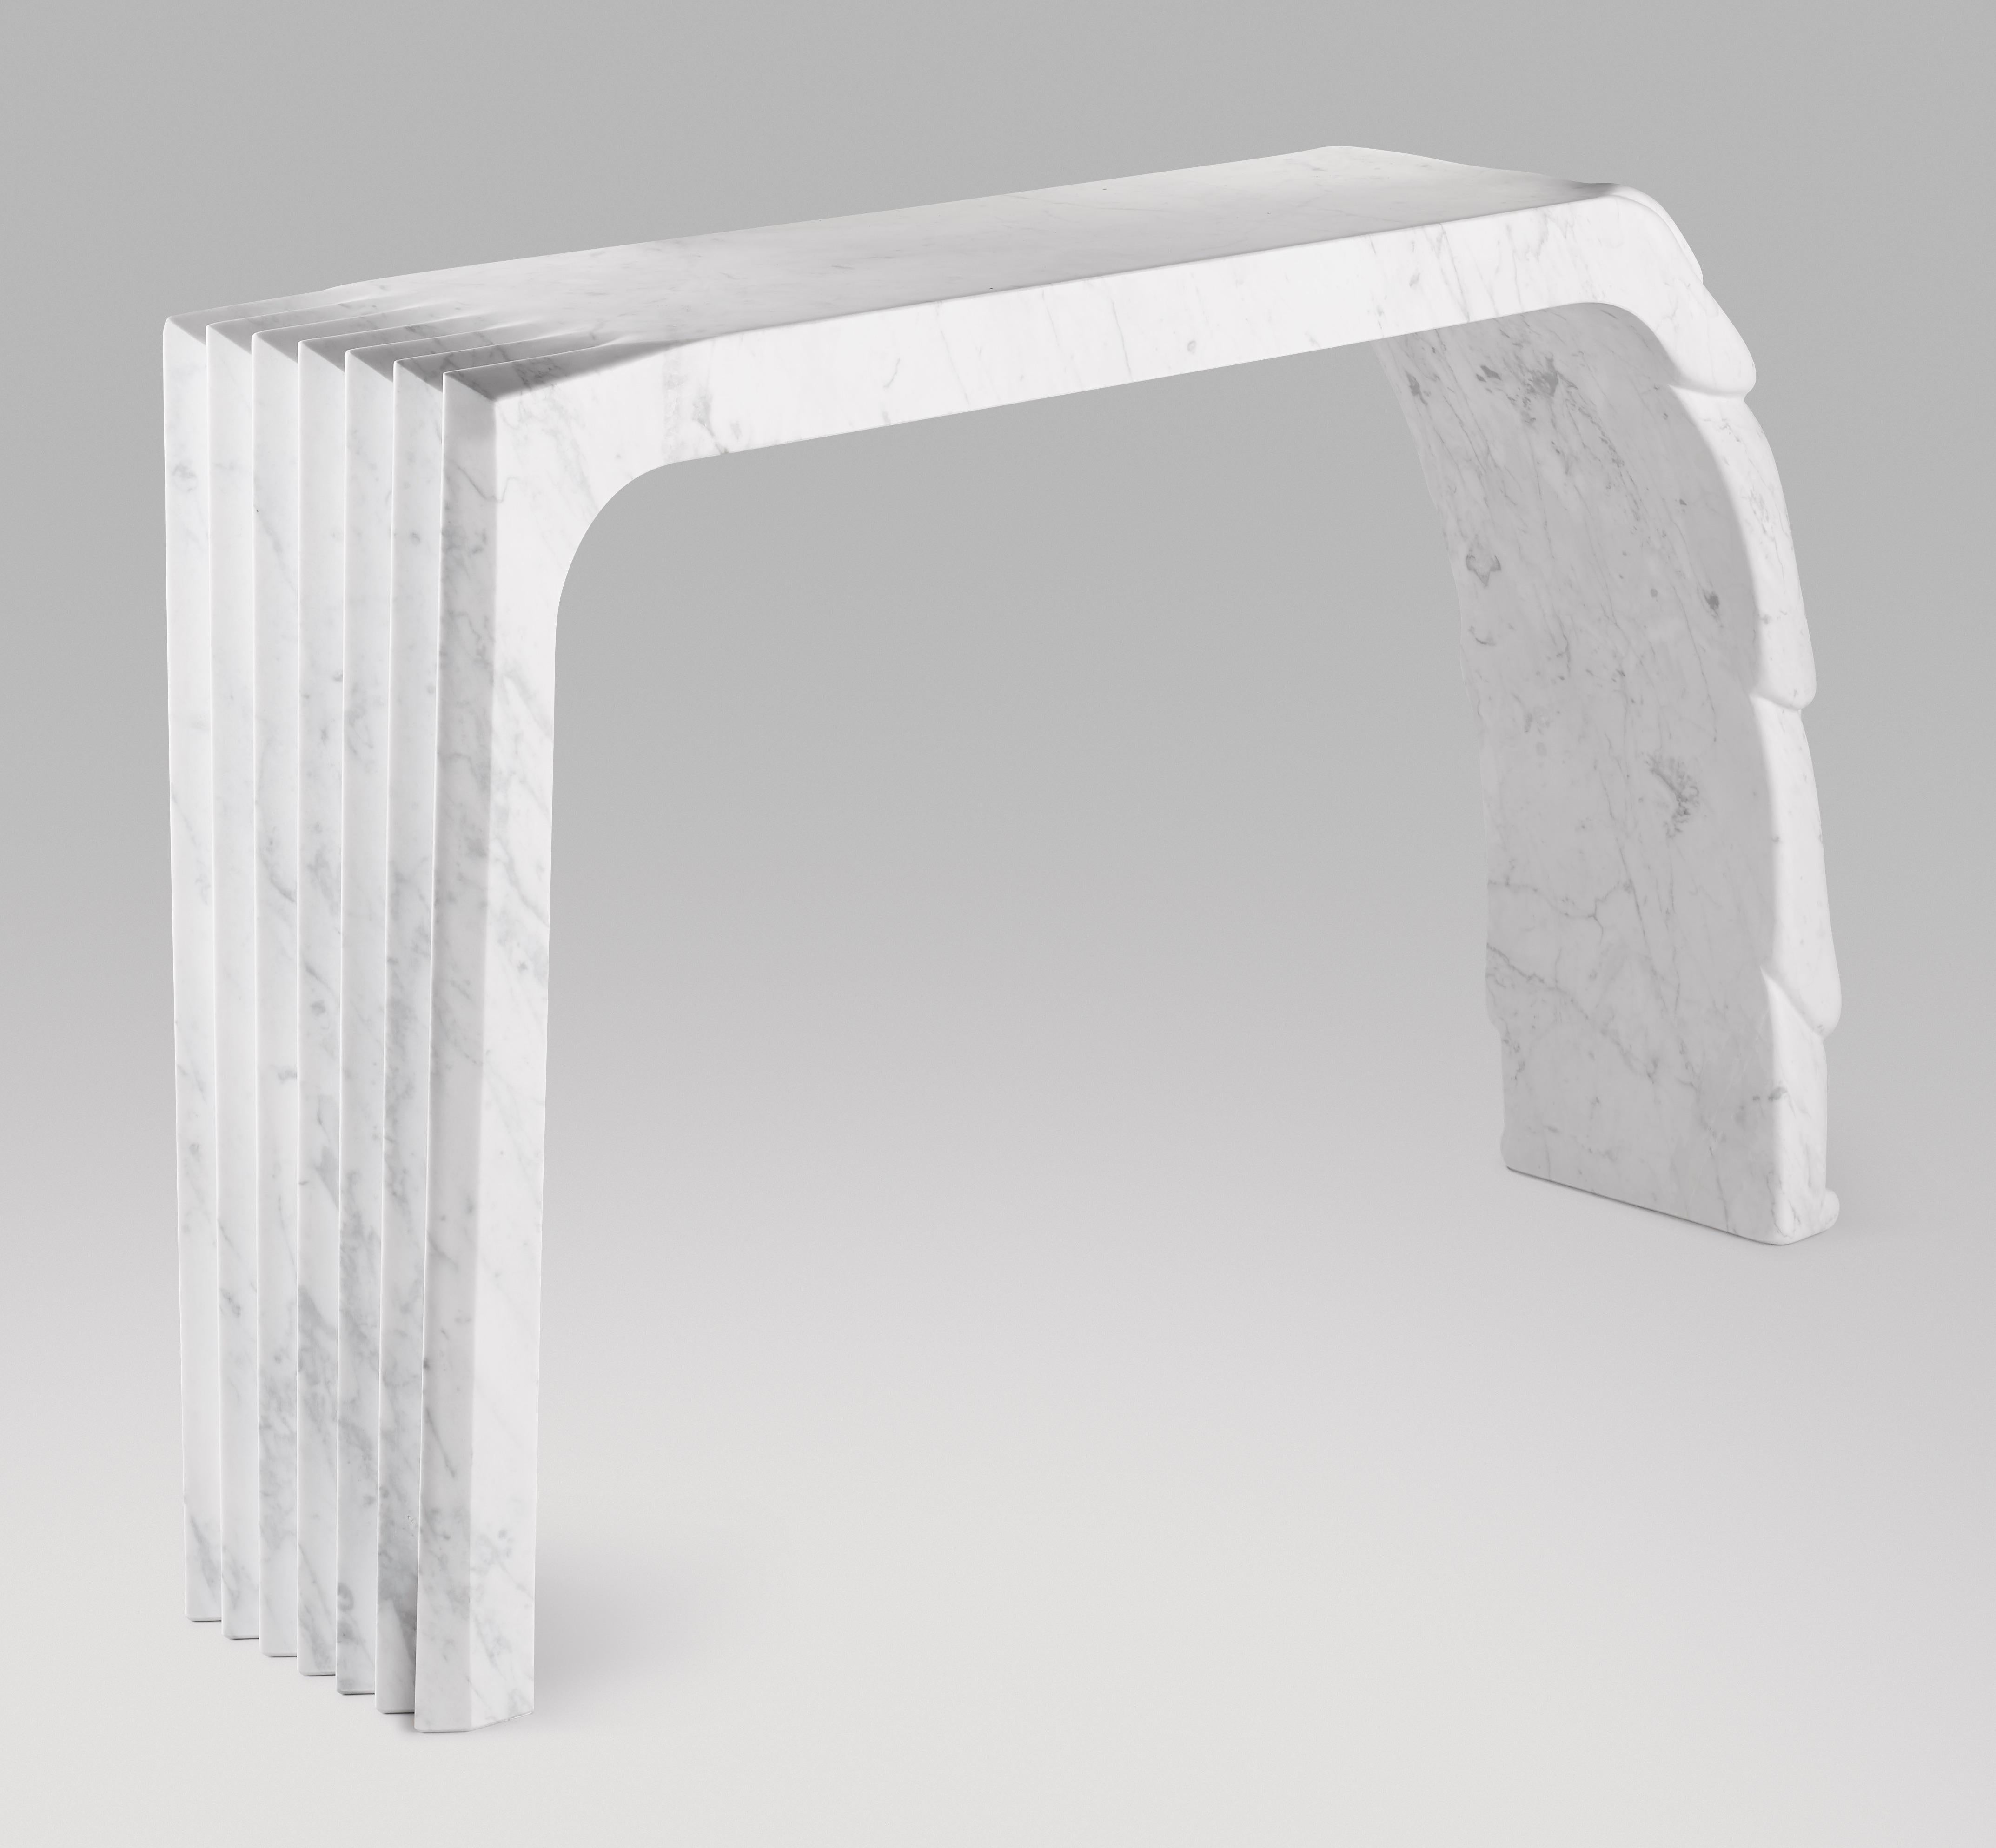 Cosulich Interiors in collaboration with Atelier Terrai: Bespoke console, entirely handcrafted in Italy, out of one solid block in white Carrara marble with an elegant satin finish. The Evolution collection, an organic modern design series, is